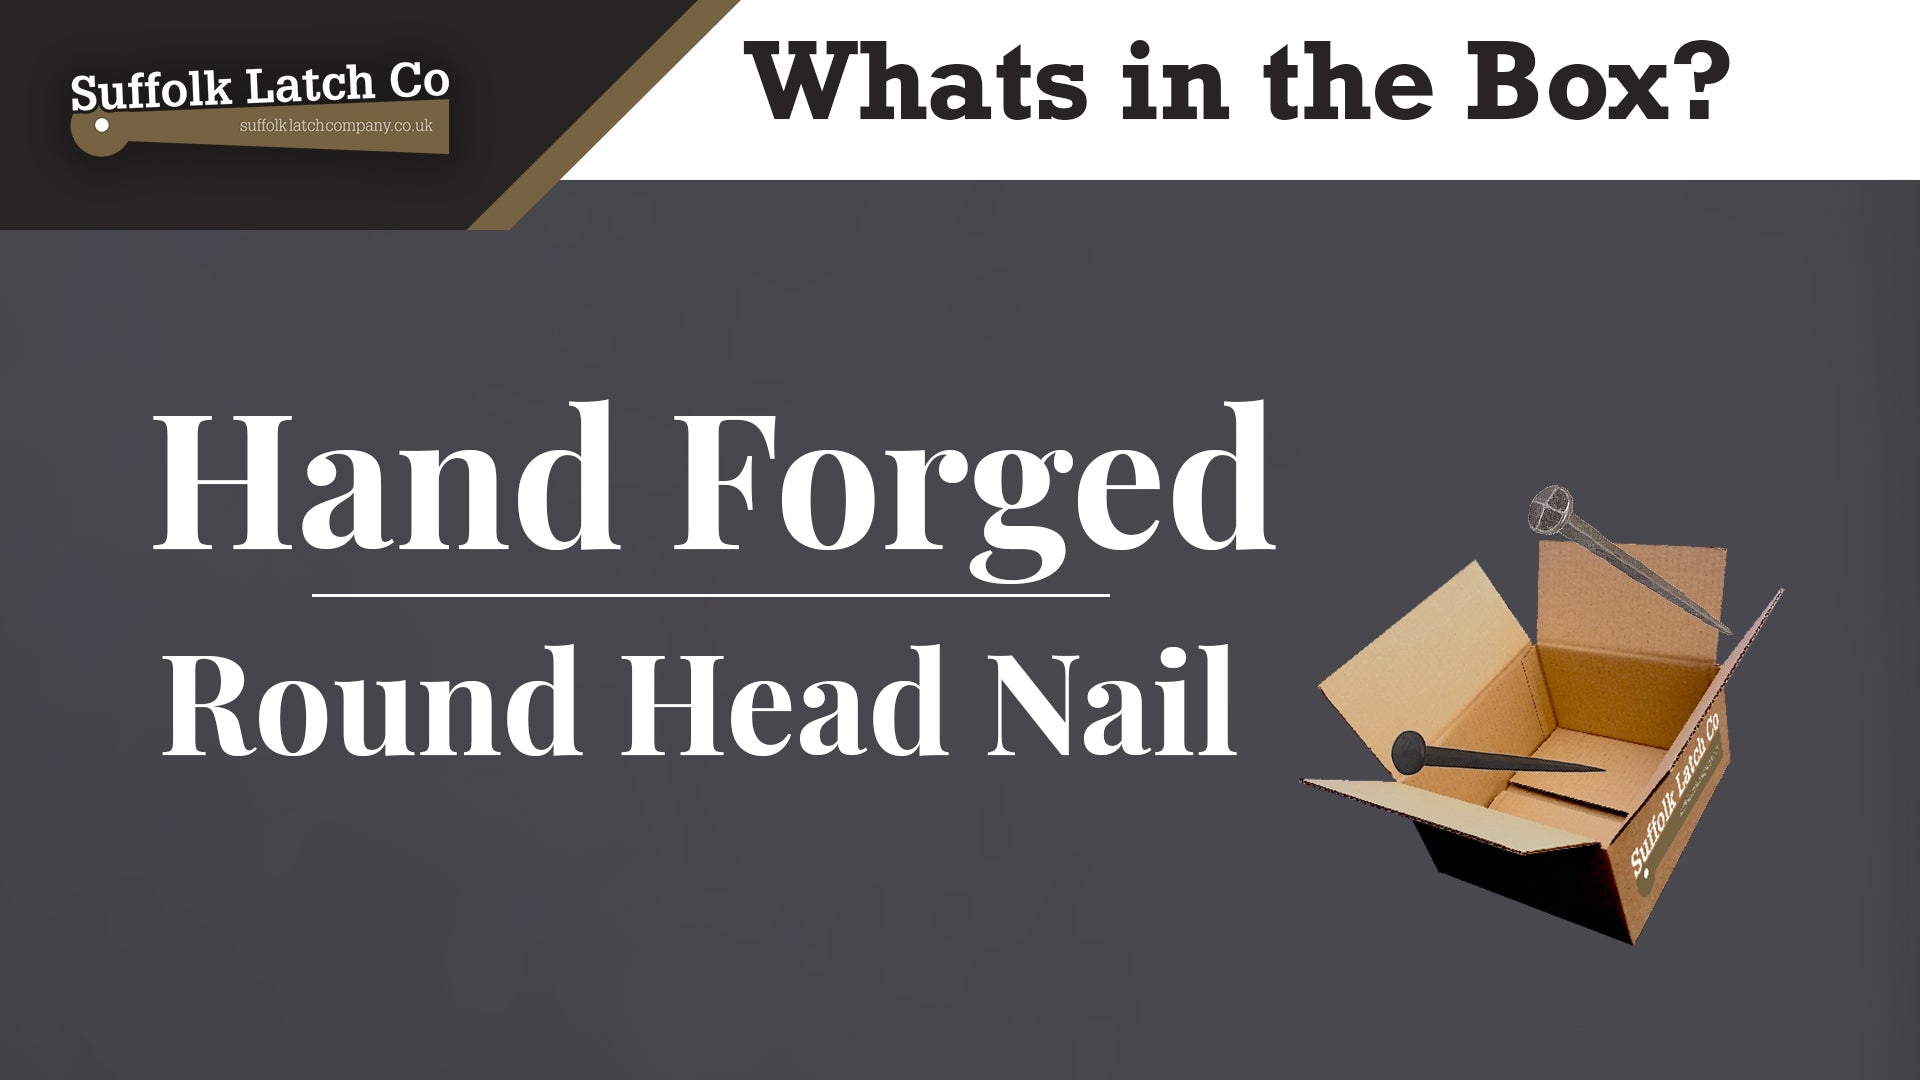 What's in the Box: Hand Forged Nail Round Head